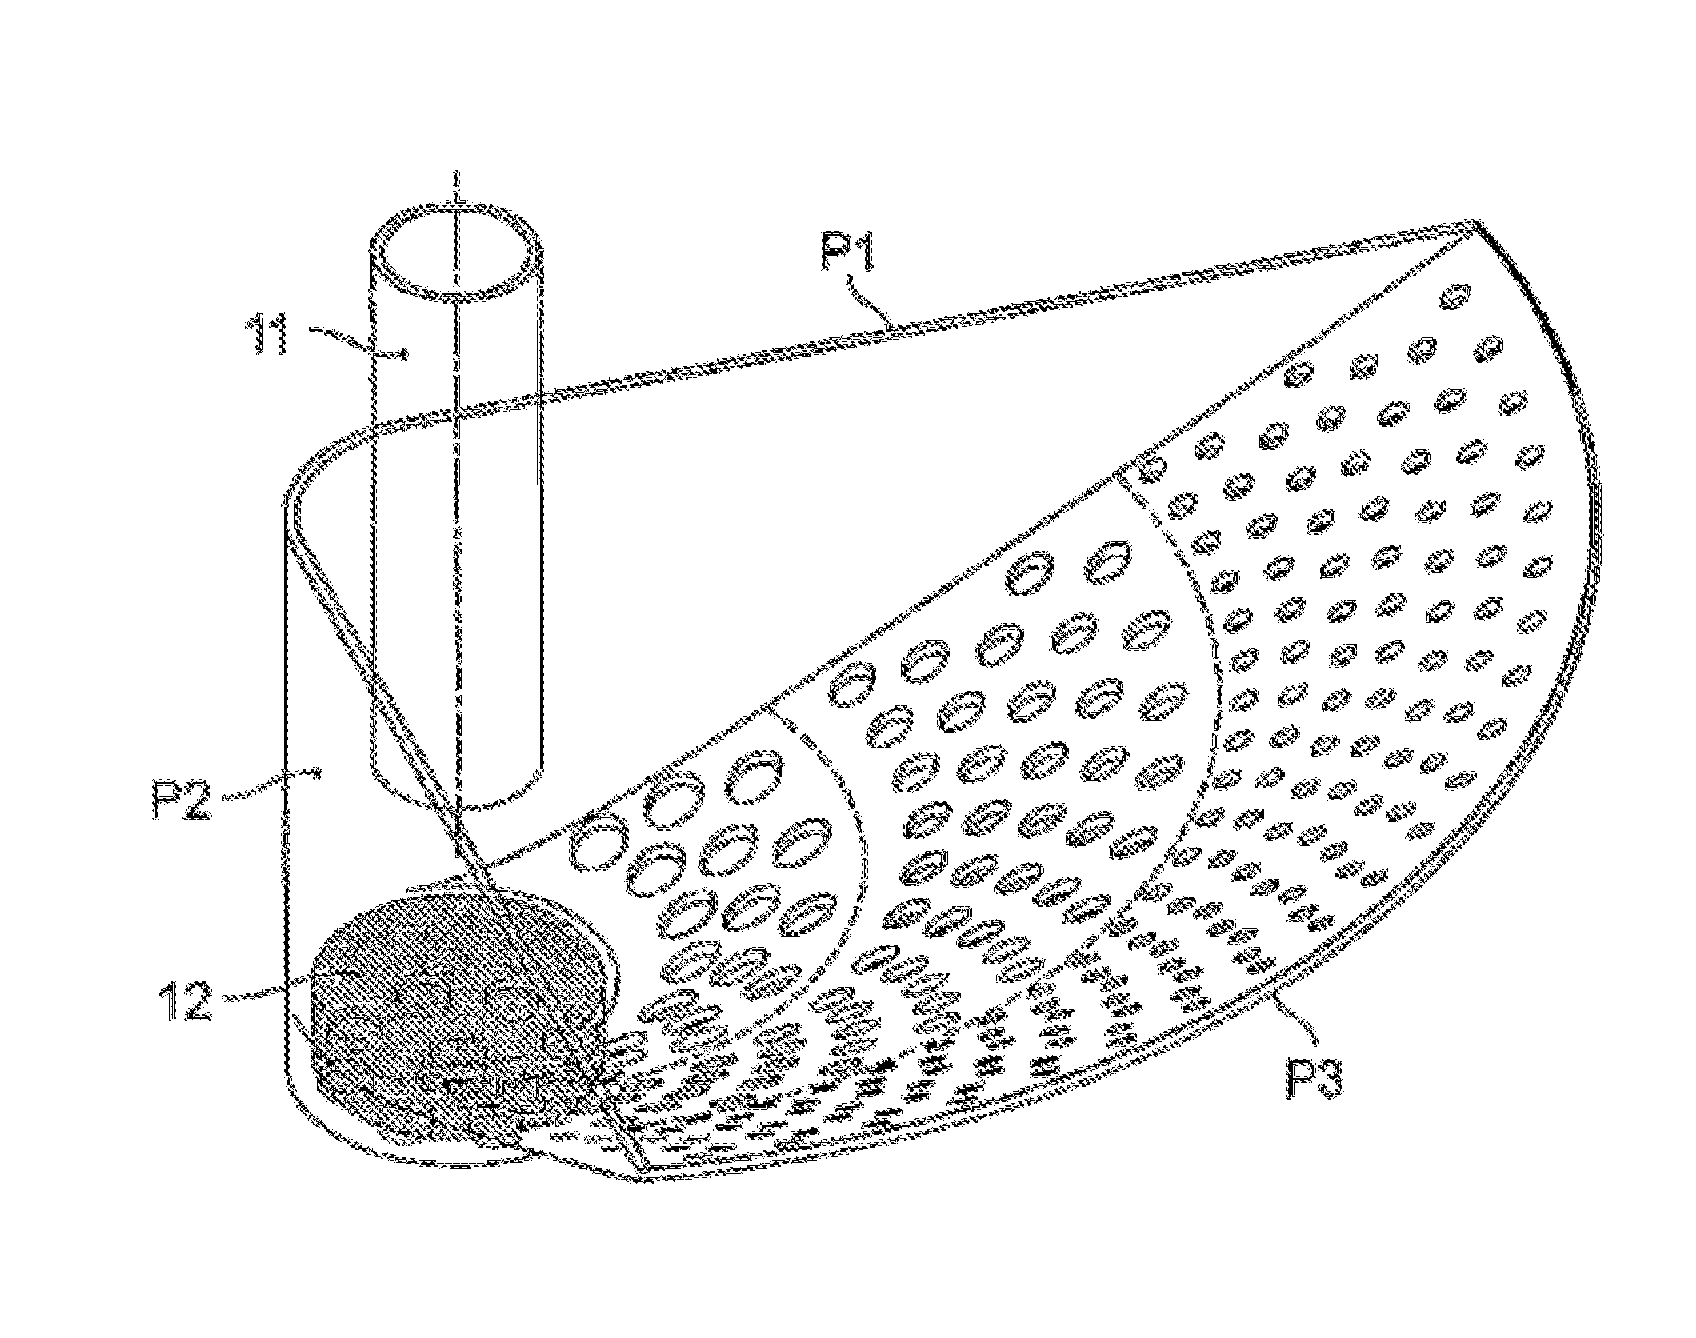 Process and device for fluidized bed torrefaction and grinding of a biomass feed for subsequent gasification or combustion